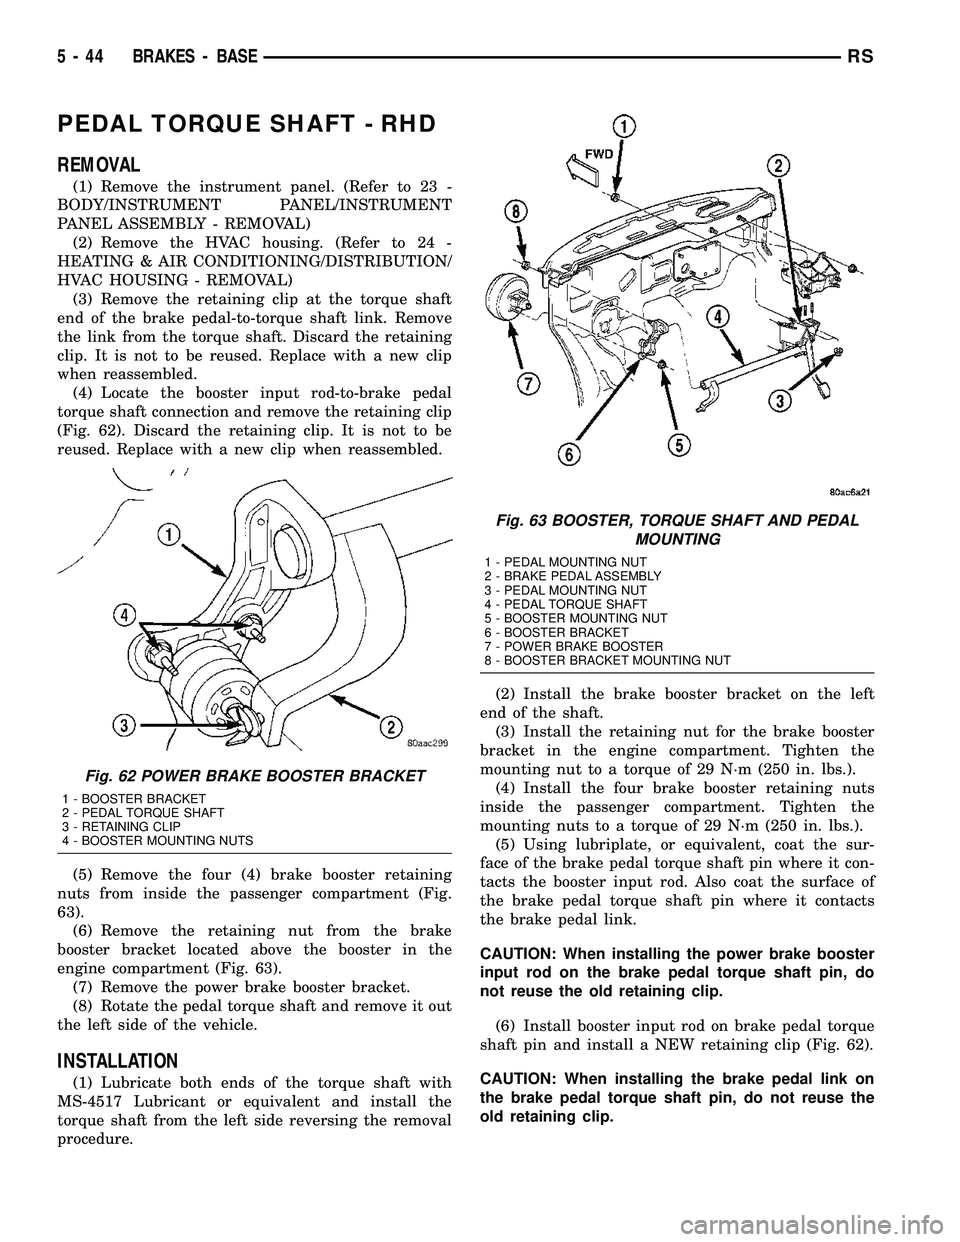 CHRYSLER VOYAGER 2005  Service Manual PEDAL TORQUE SHAFT - RHD
REMOVAL
(1) Remove the instrument panel. (Refer to 23 -
BODY/INSTRUMENT PANEL/INSTRUMENT
PANEL ASSEMBLY - REMOVAL)
(2) Remove the HVAC housing. (Refer to 24 -
HEATING & AIR CO